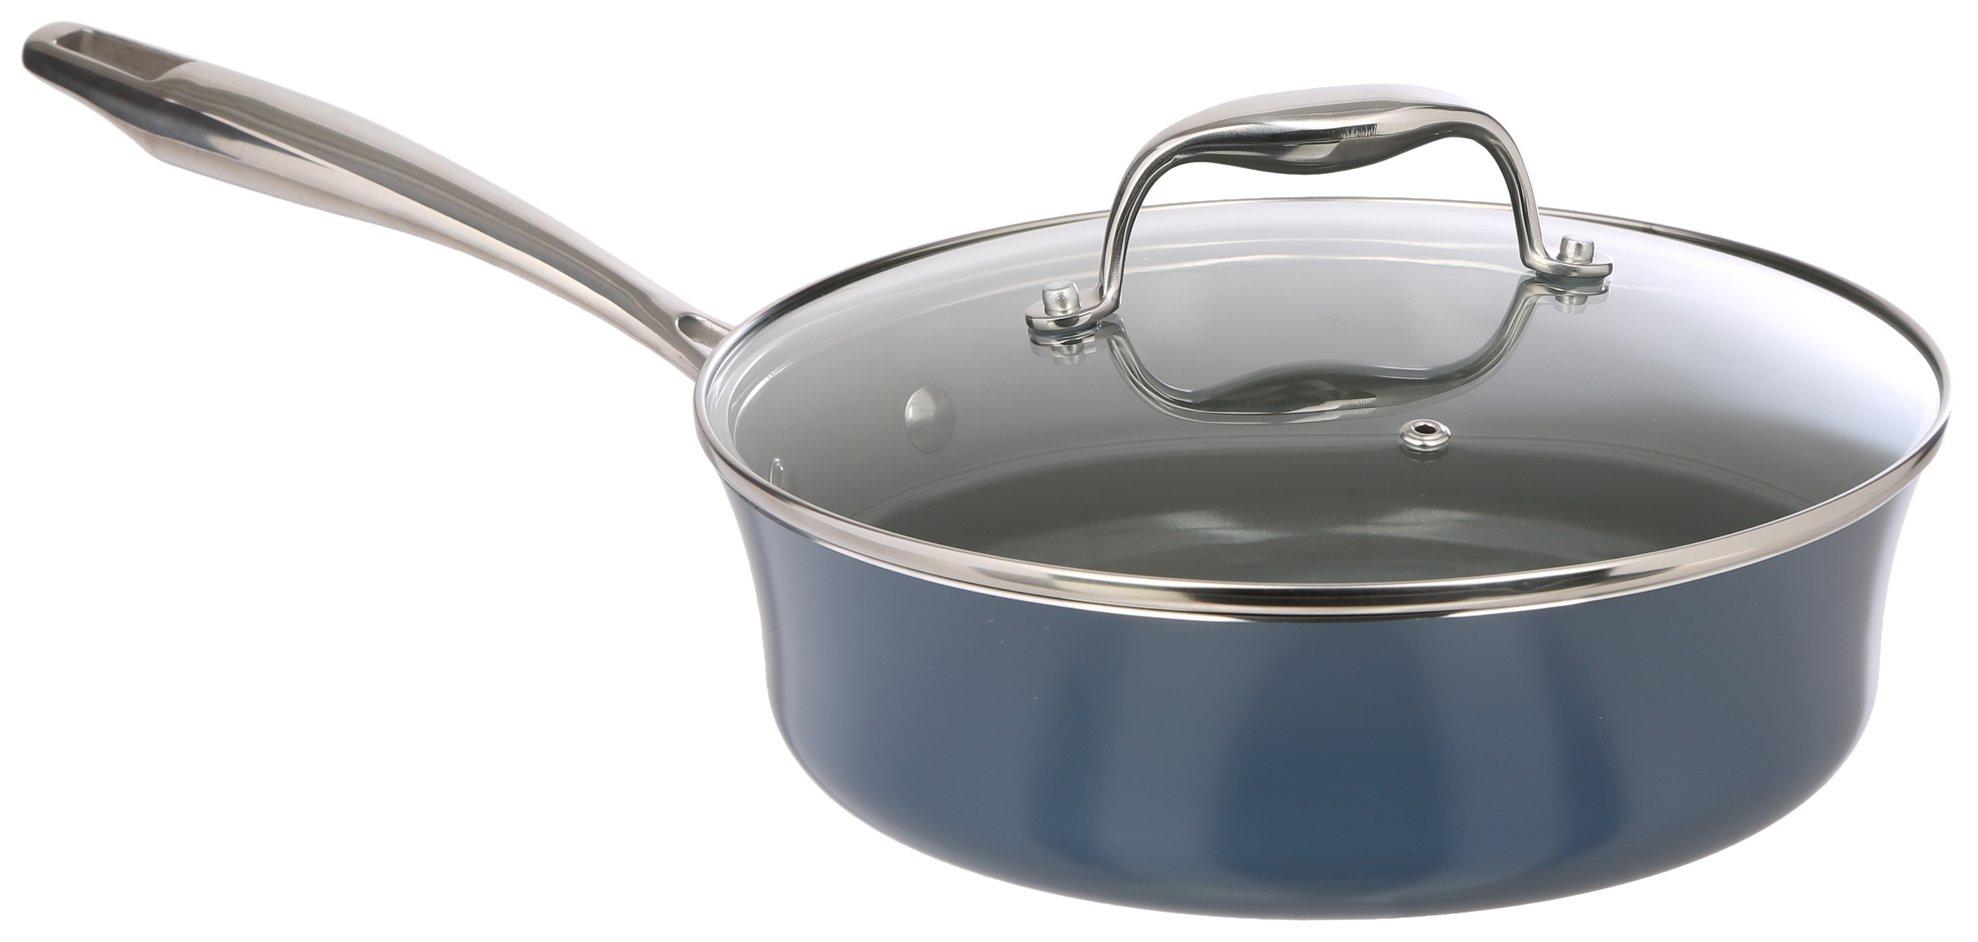 Zest Kitchen and Home Ceramic Saute Pan with Lid